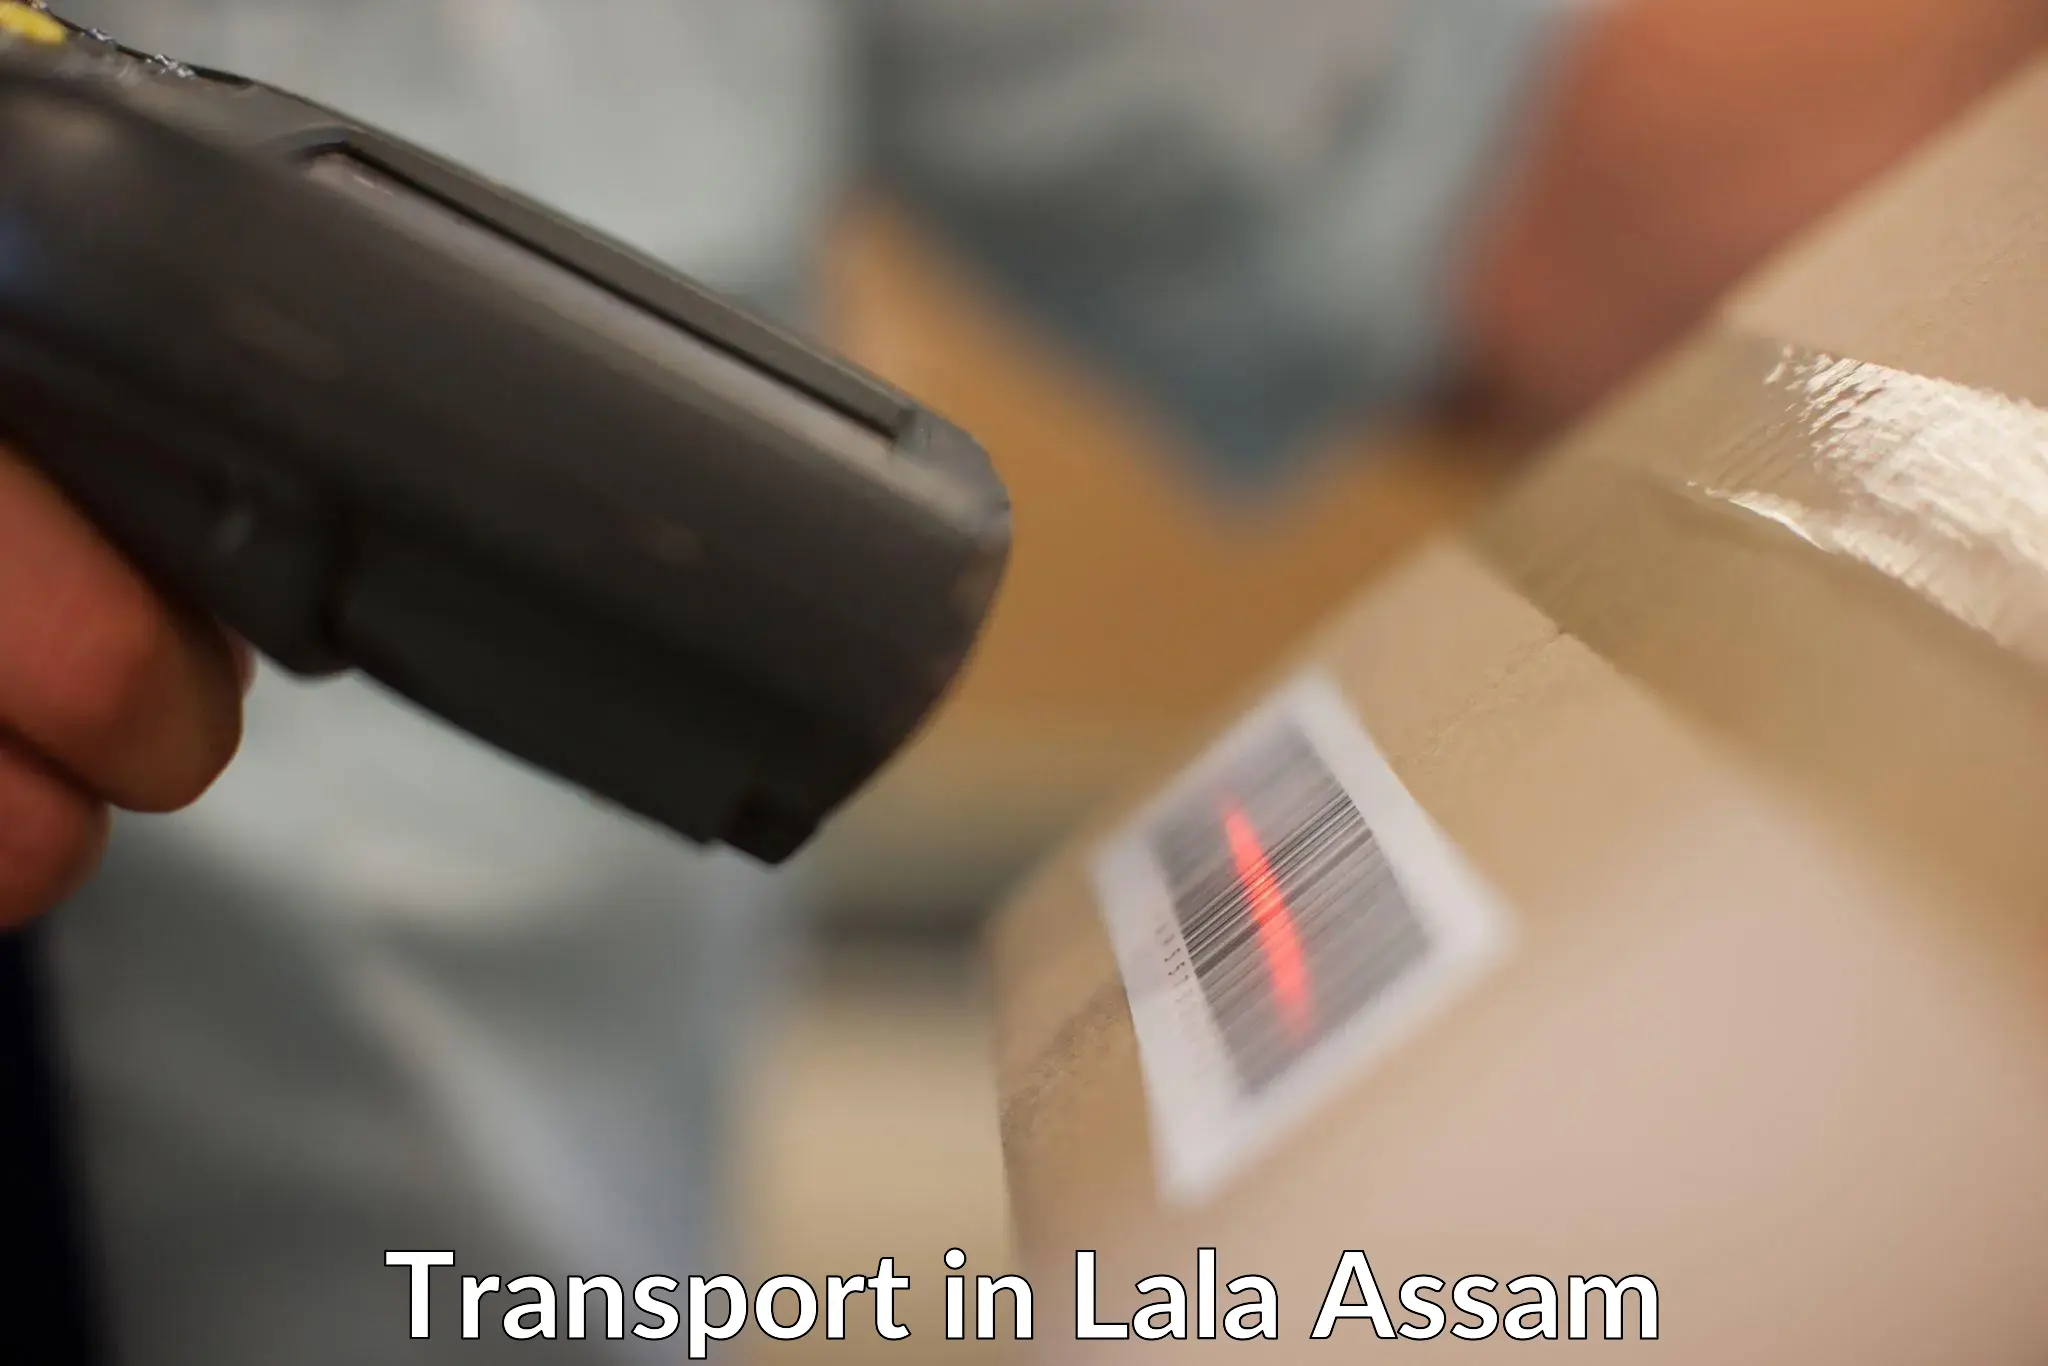 Transport services in Lala Assam